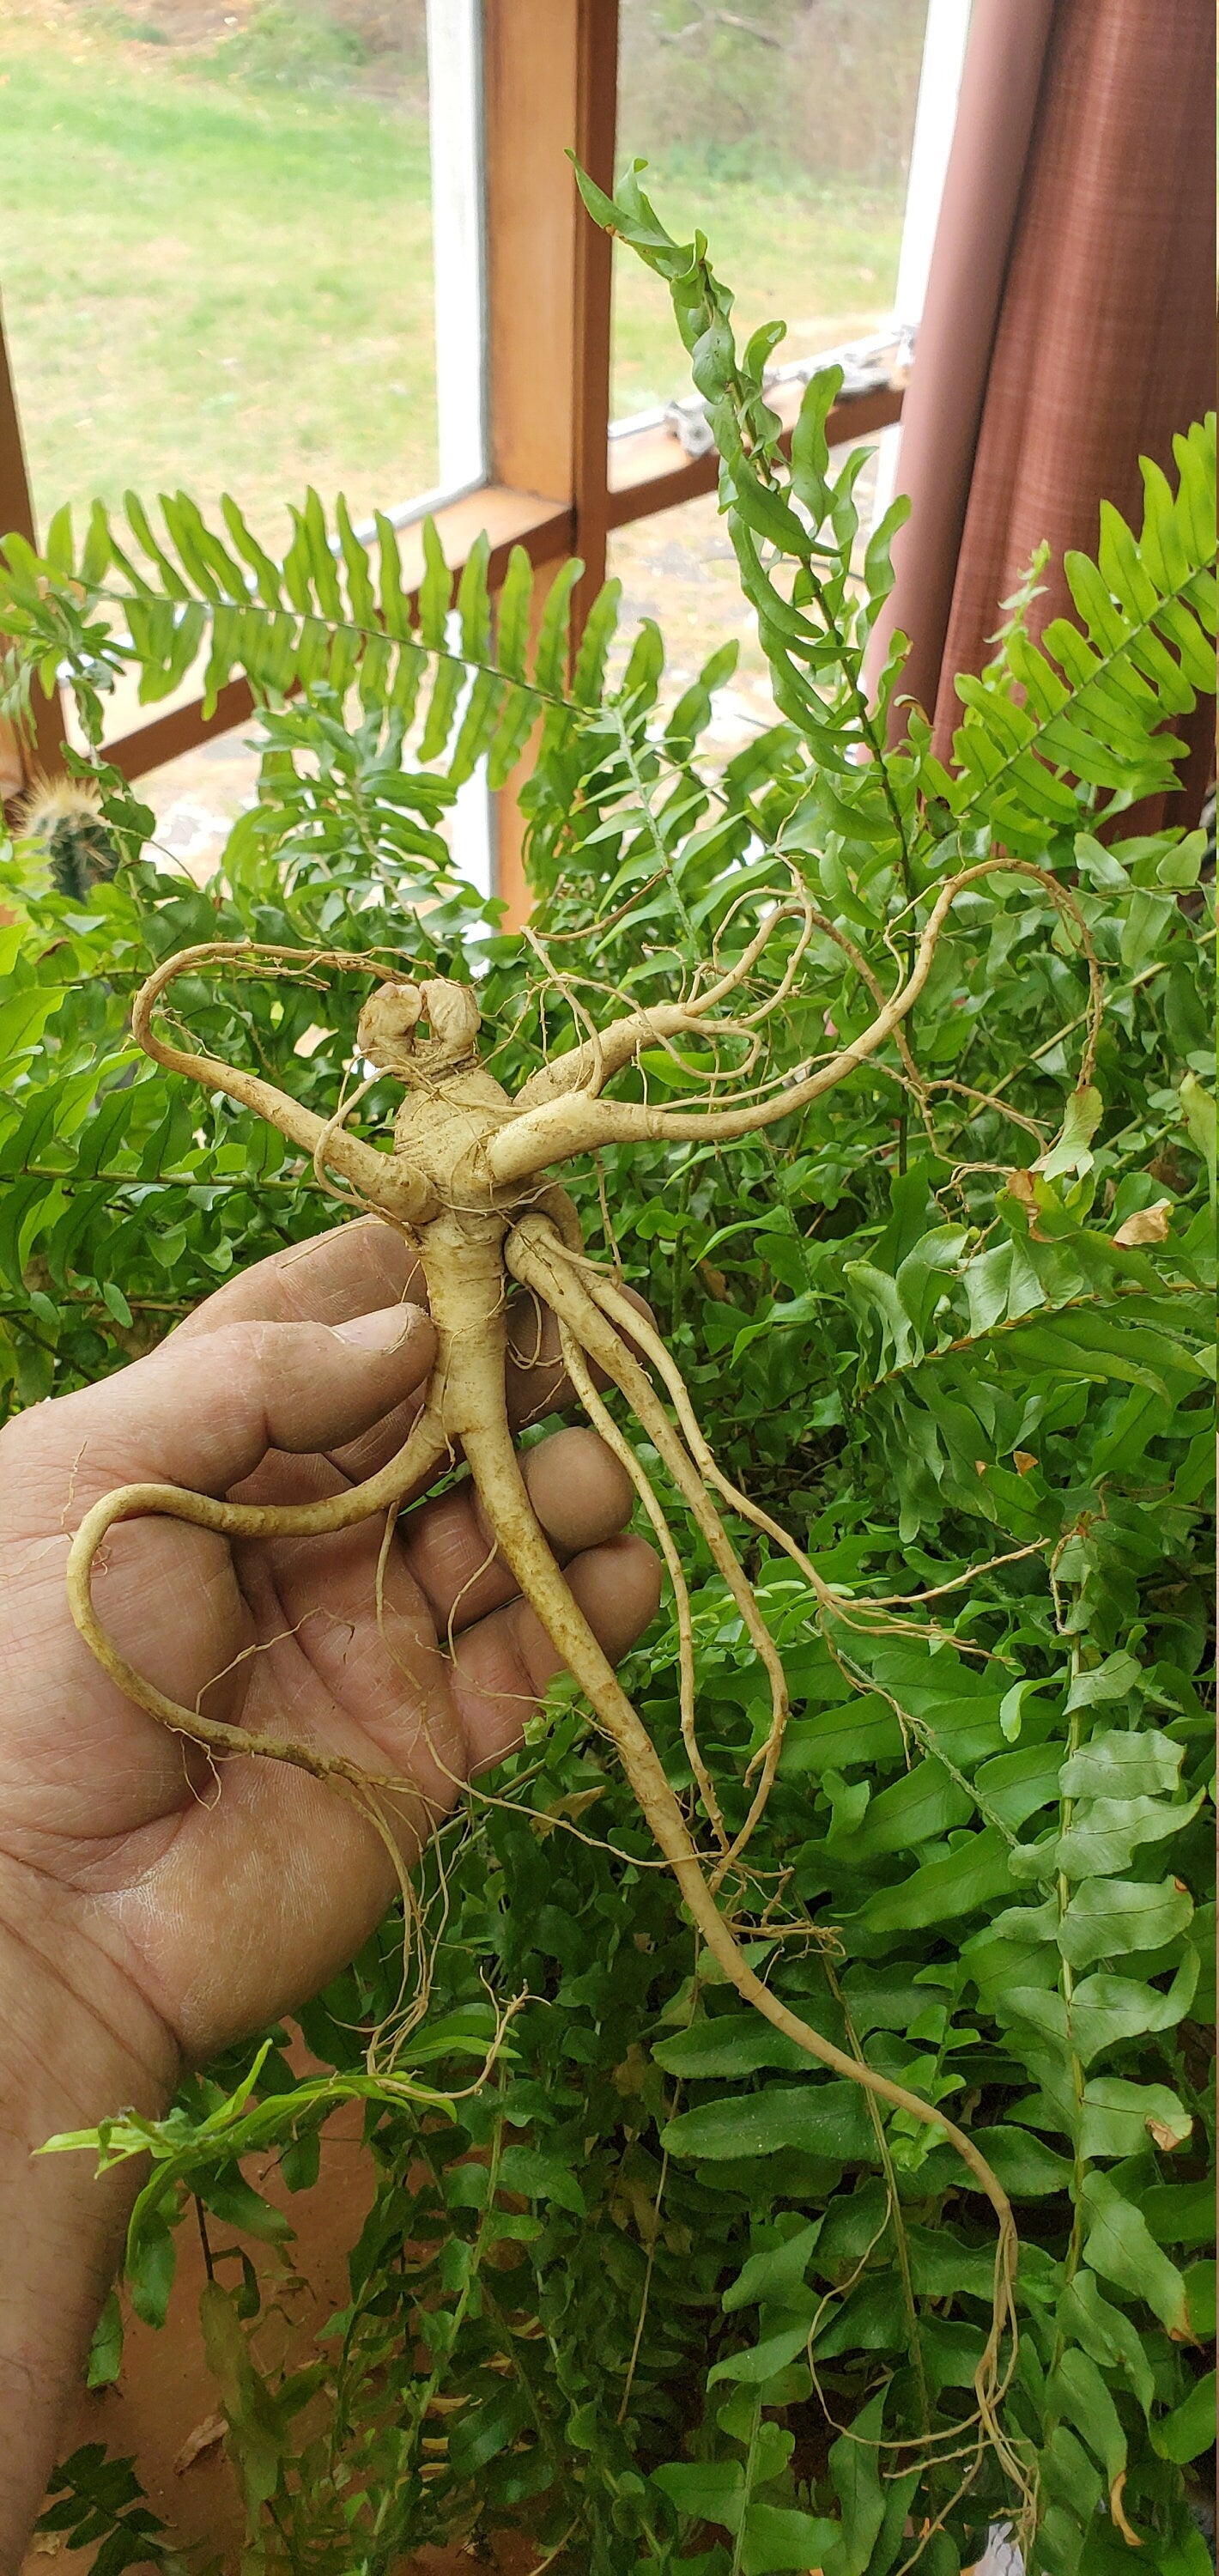 PREORDER FOR FALL! American Ginseng Roots (Panax quinquefolia), Dormant 3-5yr